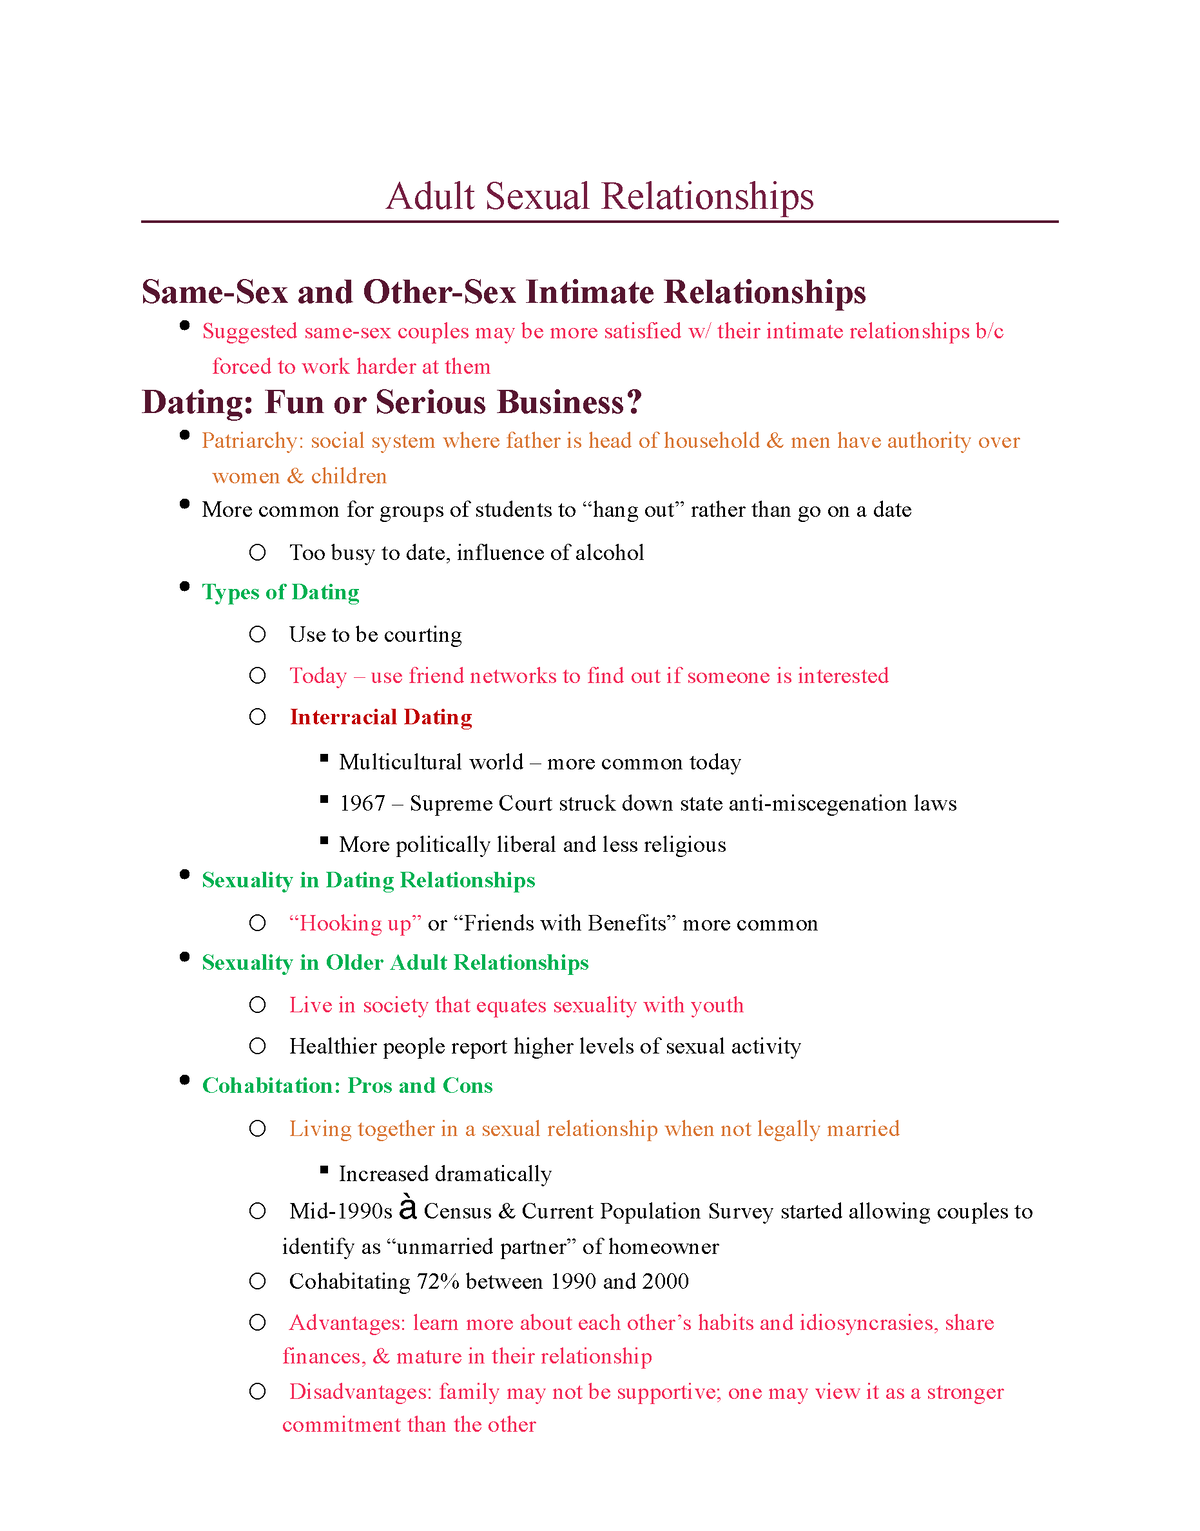 Adult Sexual Relationships - Adult Sexual Relationships Same-Sex and Other- Sex Intimate